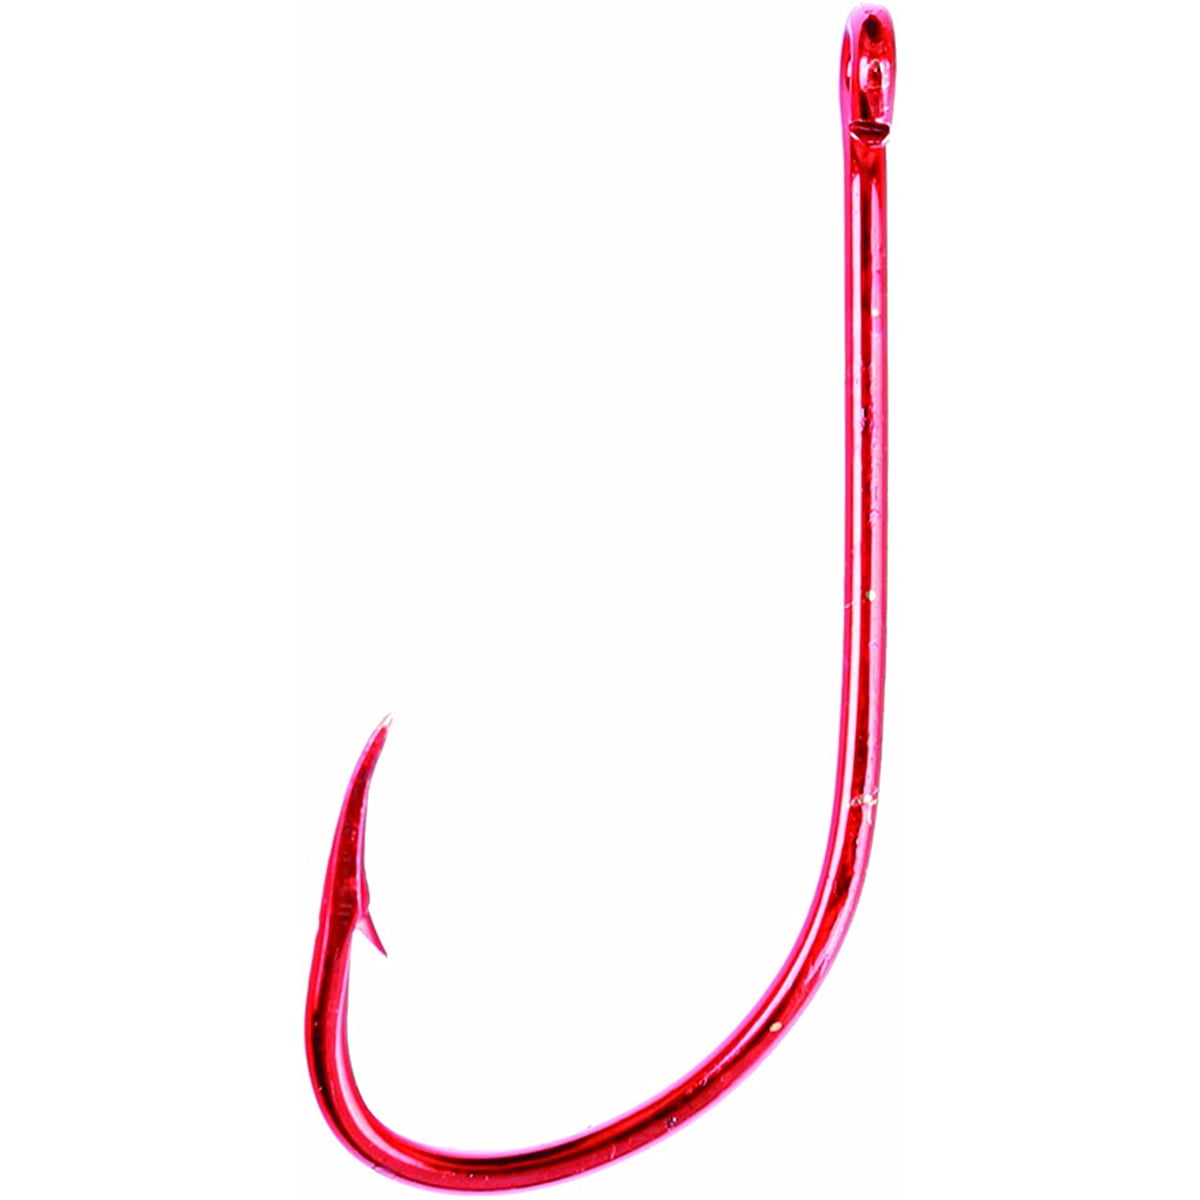 Eagle Claw 139RQH Snelled Baitholder Hook Assortment, Red, 24 Pack